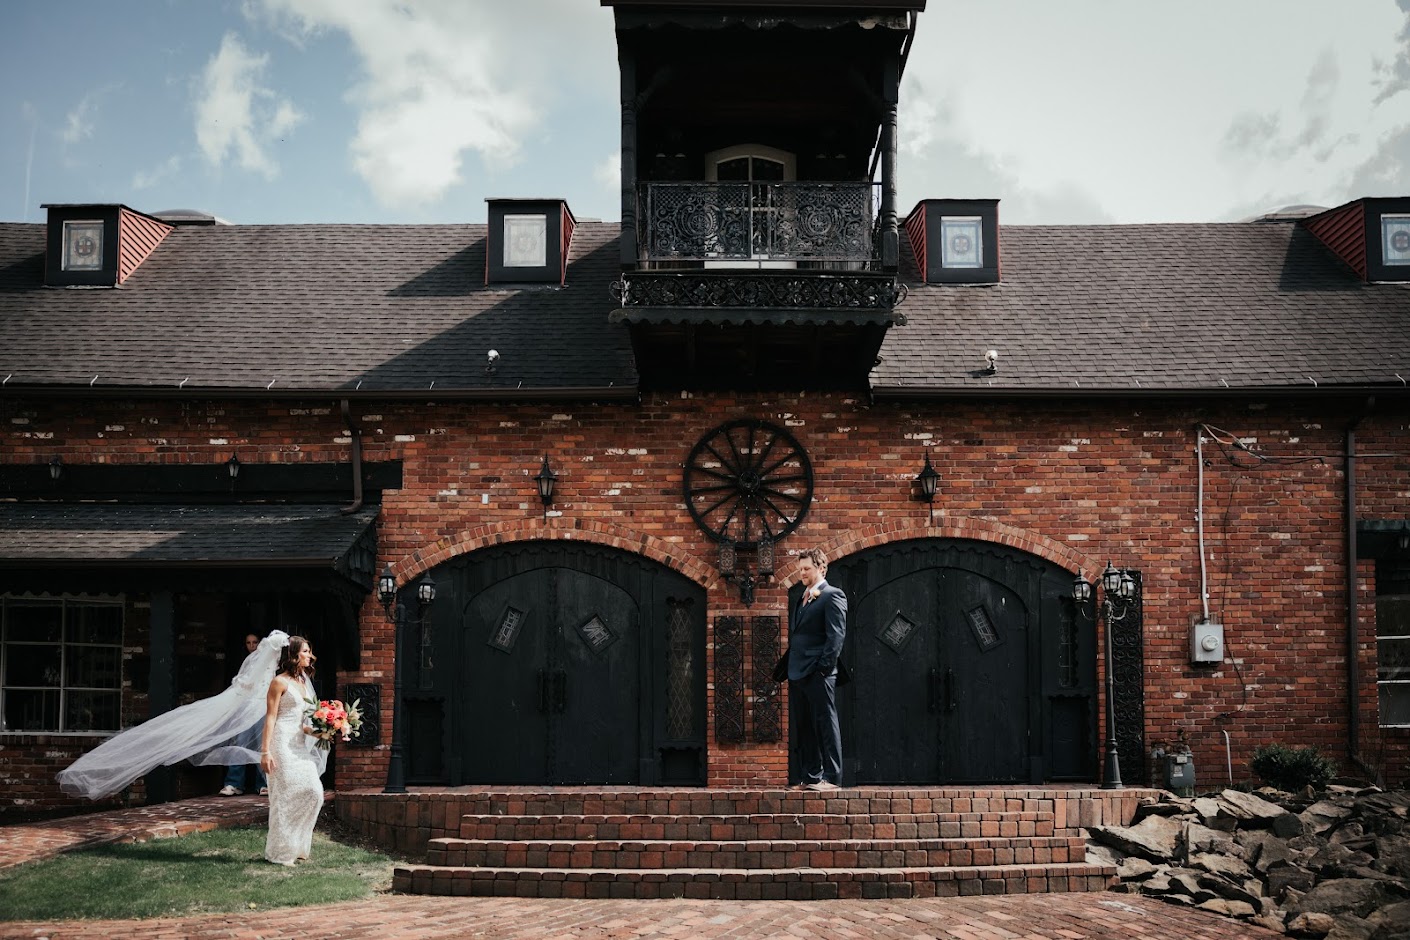 A photo of a groom and bride standing far apart in front of the Barn at Madison wedding venue.